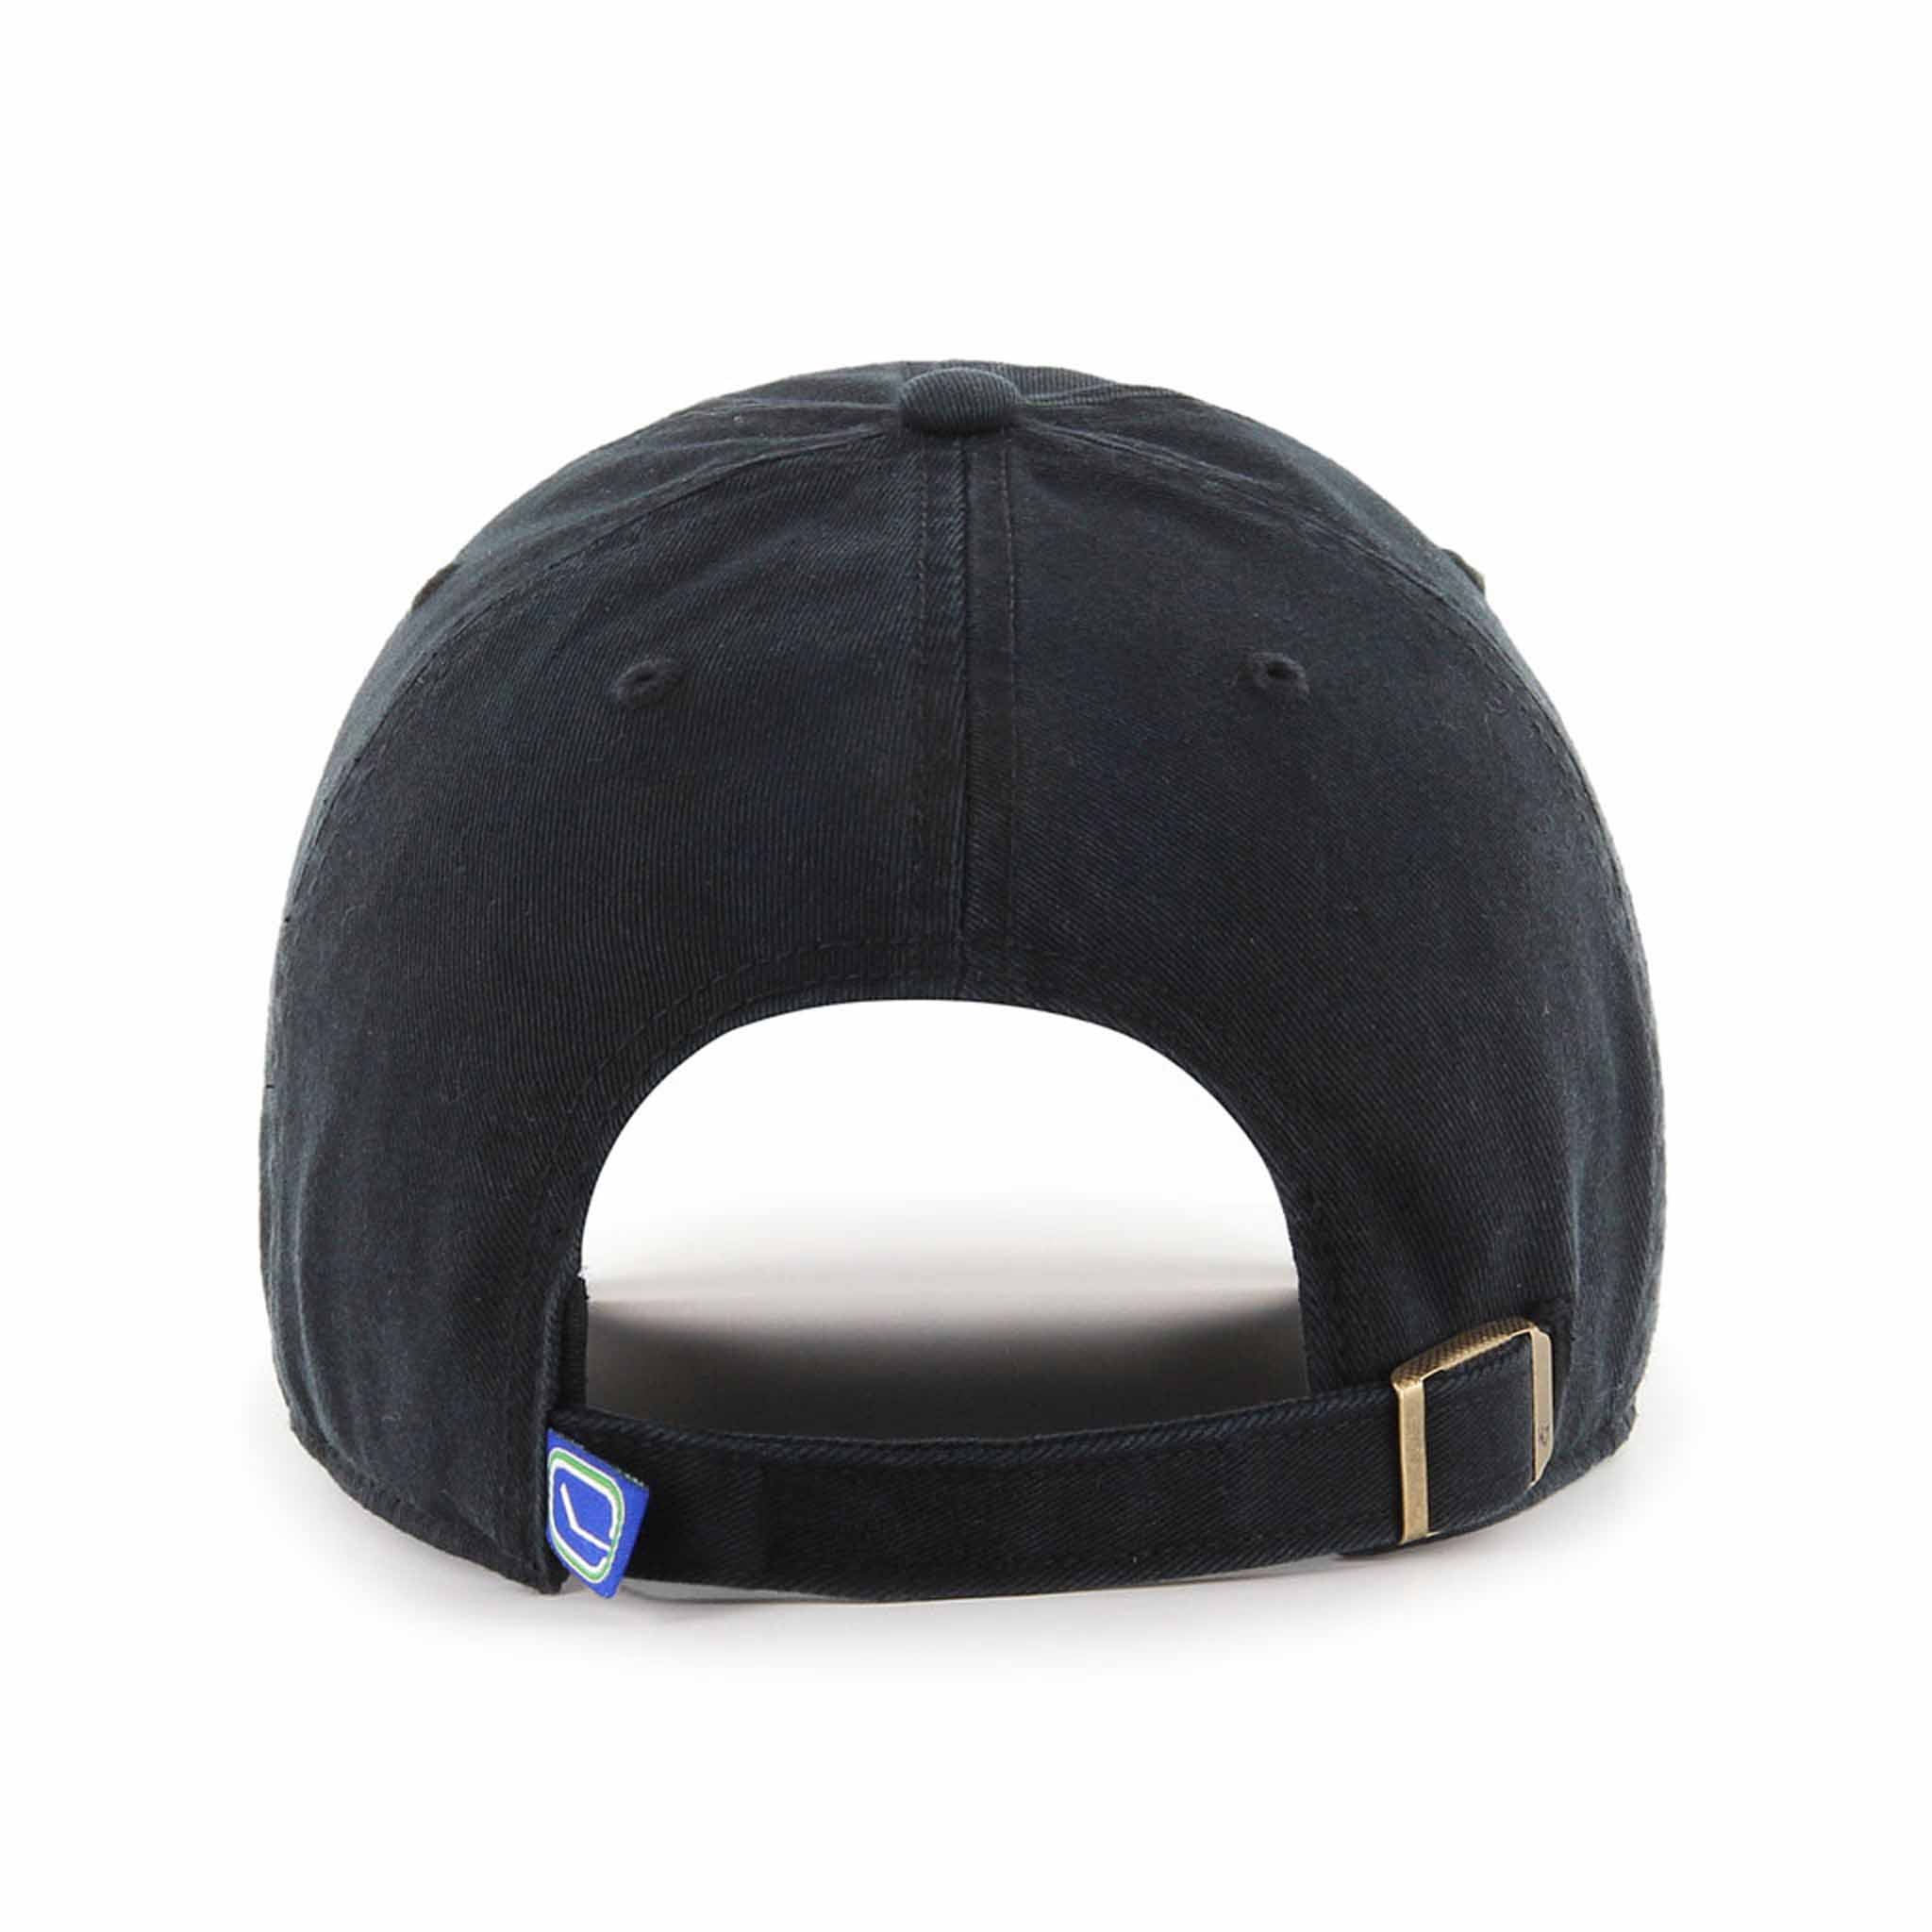 Vancouver Canucks 47 clean up hat